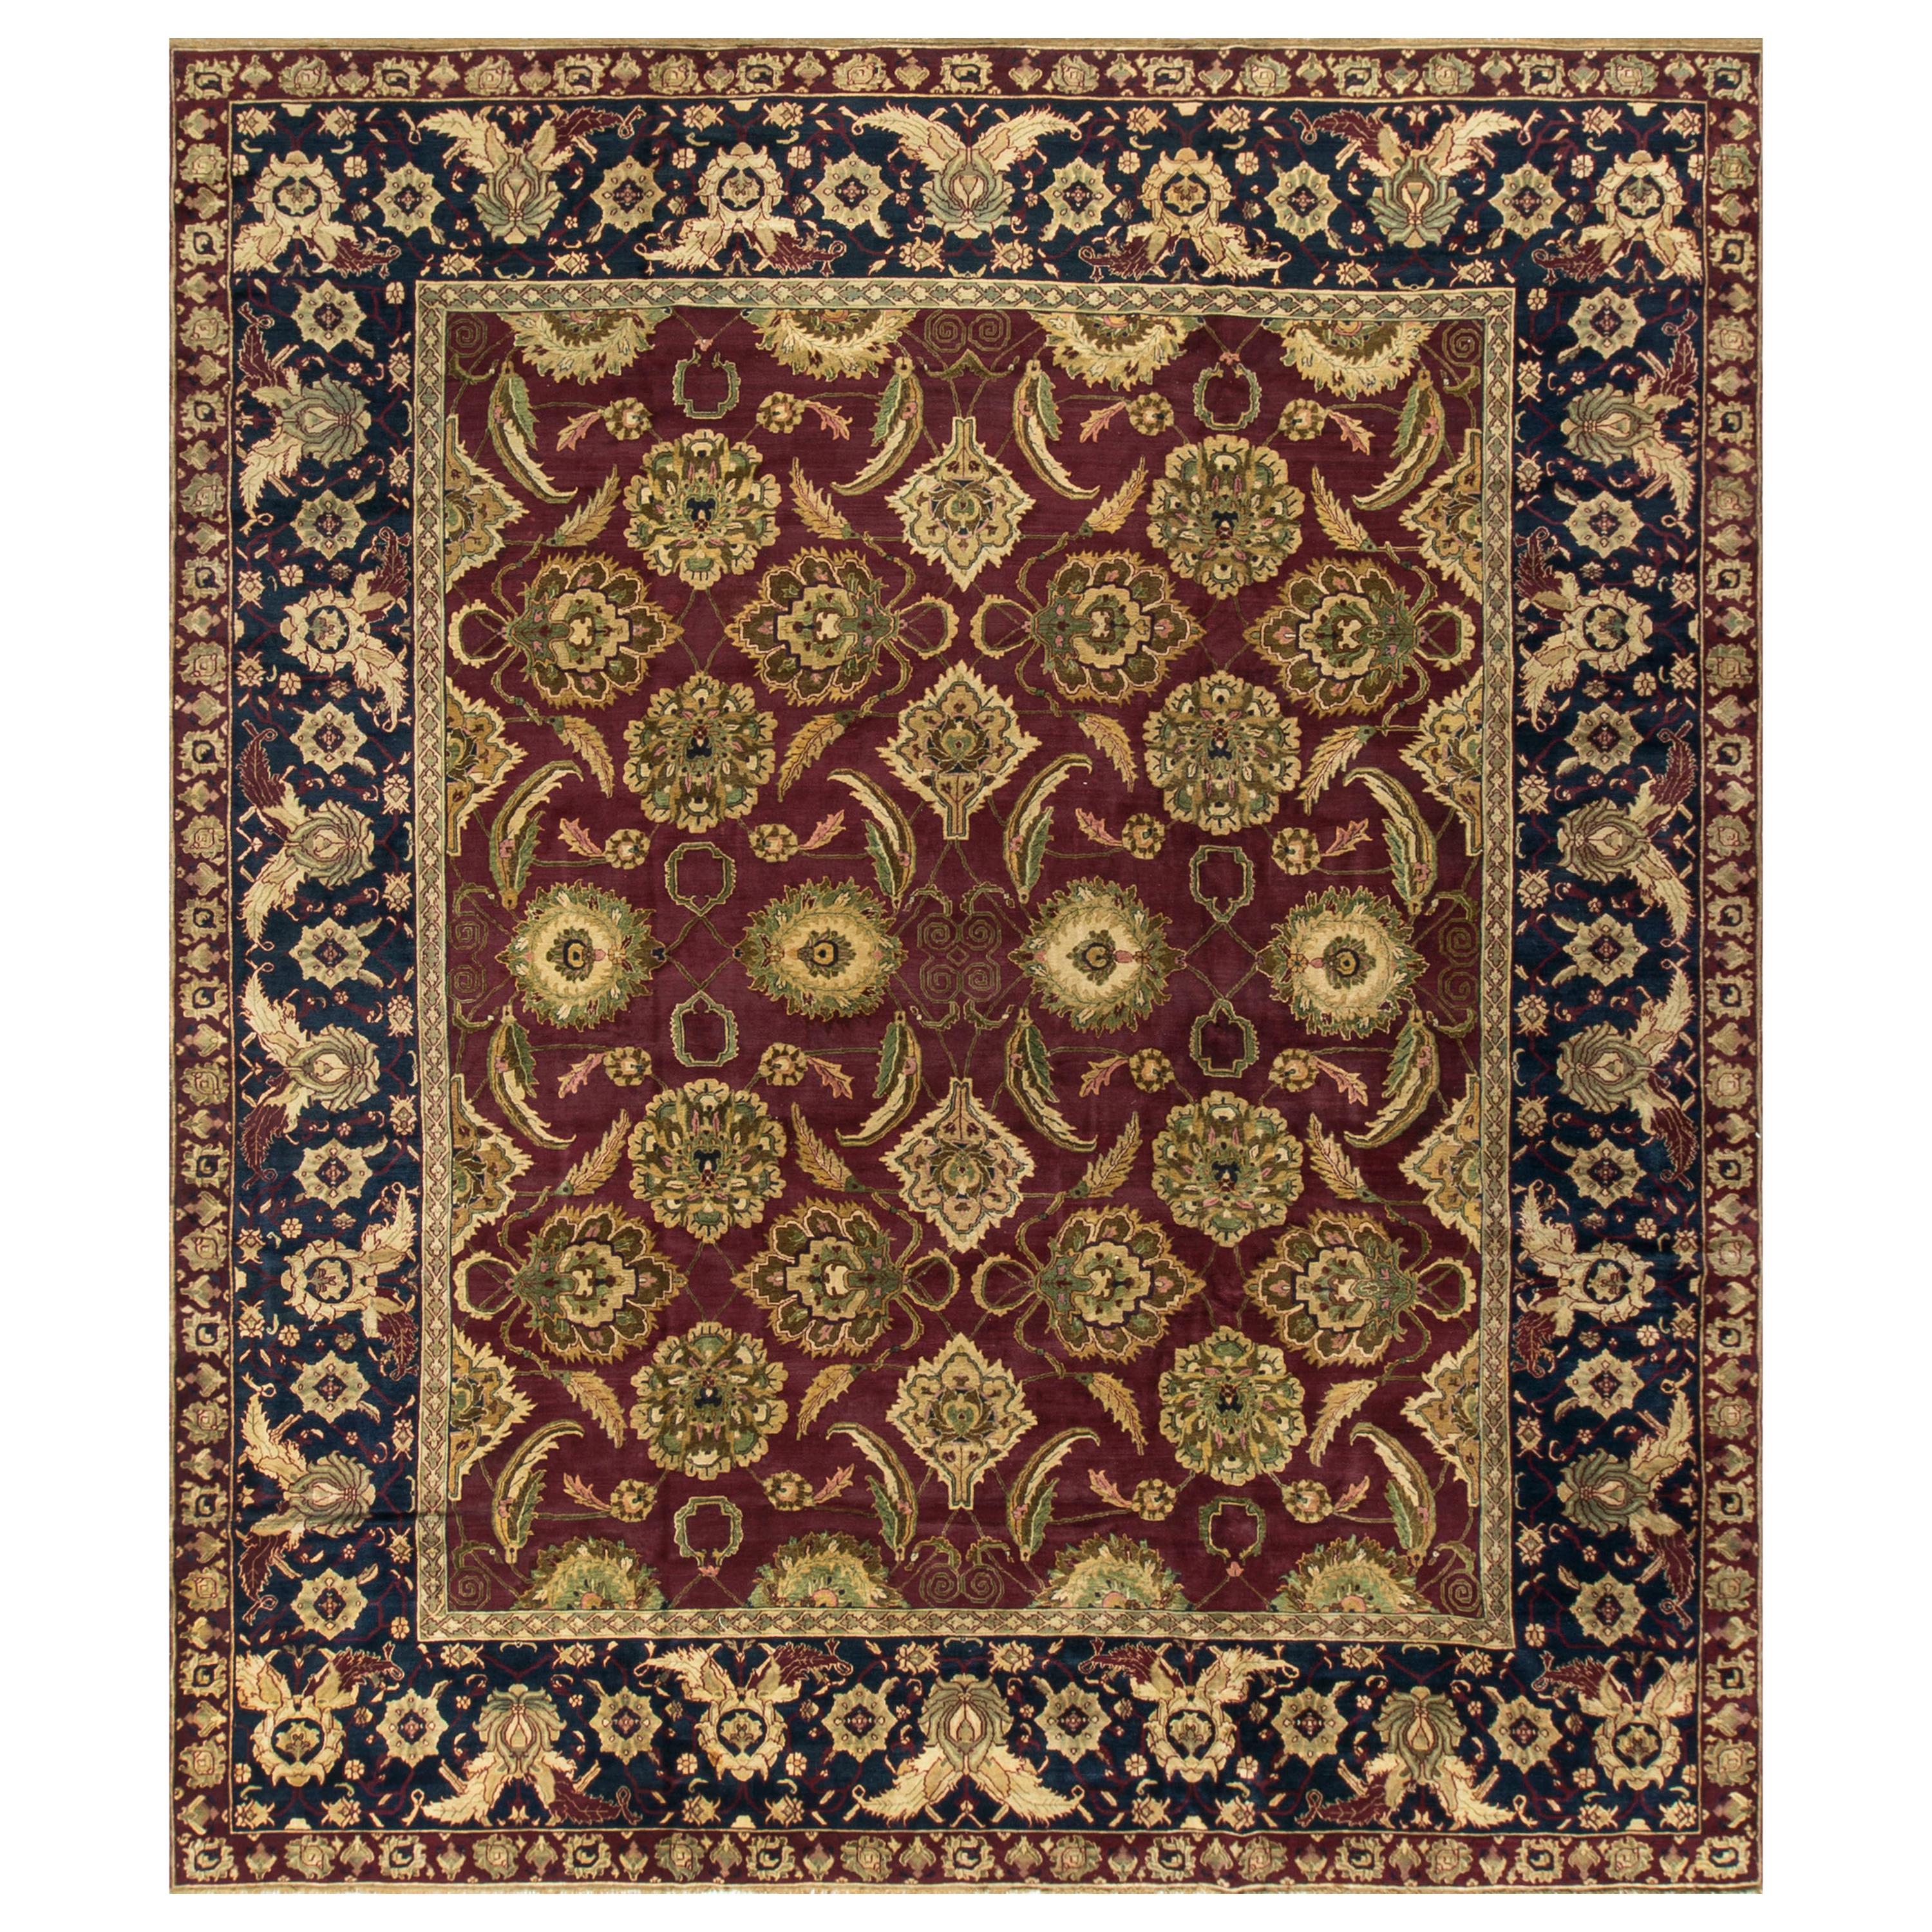 Antique Indian Agra Red / Navy Rug, circa 1890, Size 11'8 x 13'7 For Sale